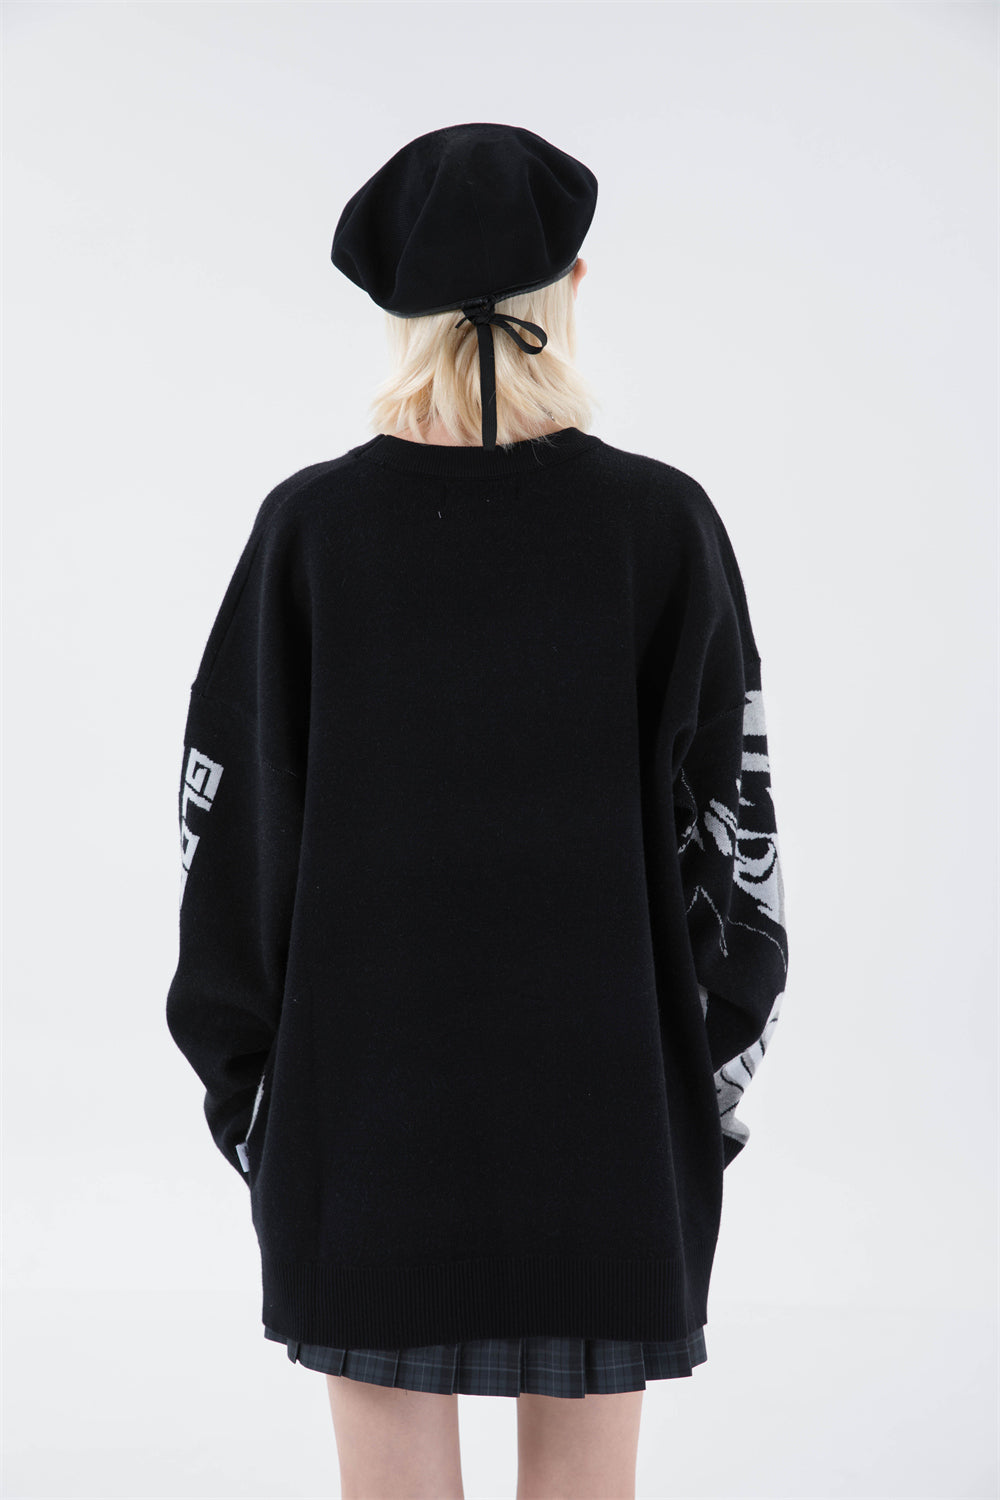 Misa Anime Knitted Sweater